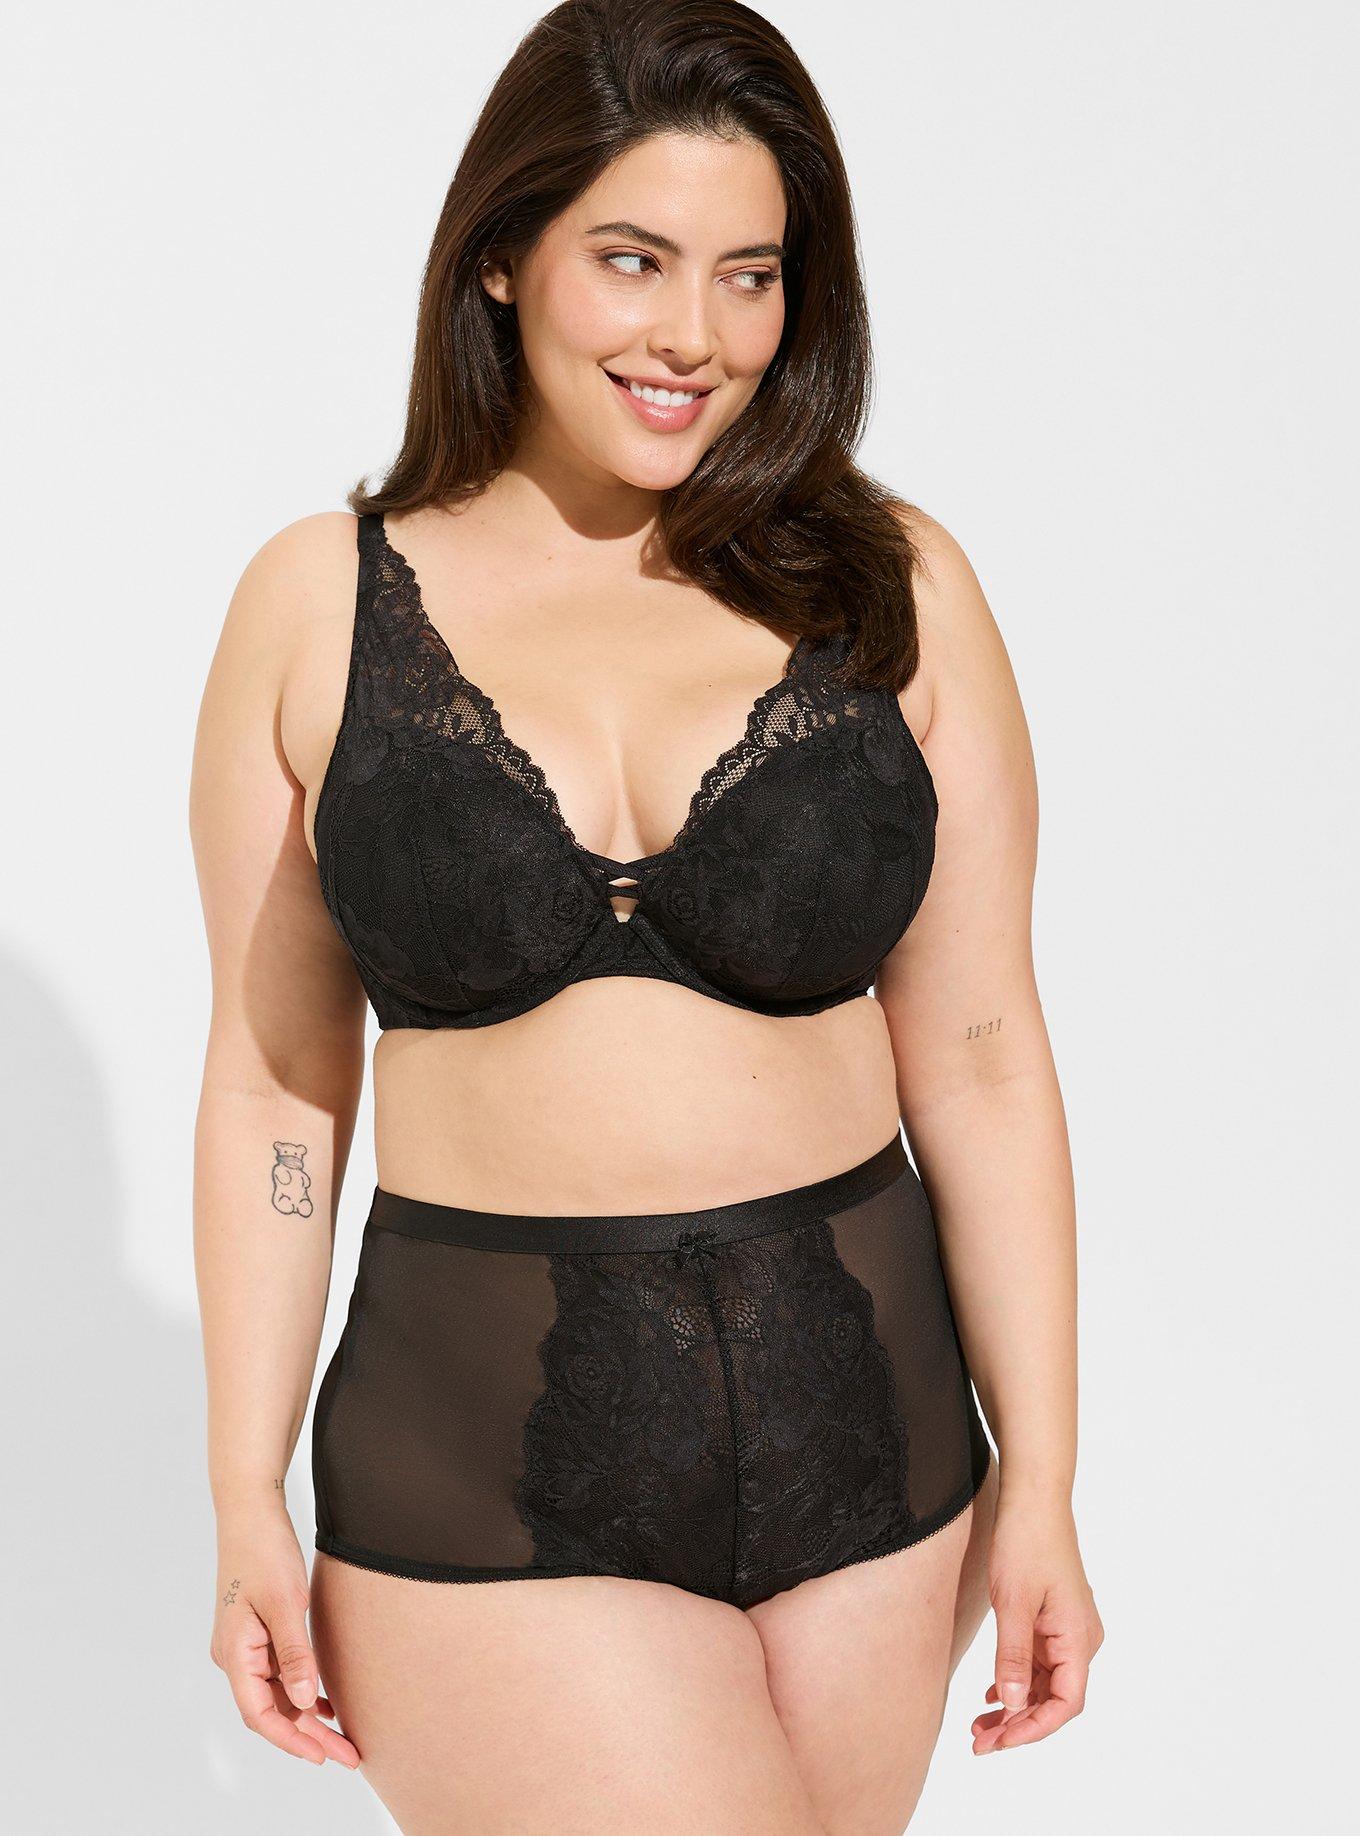 Torrid Black Lace Floral Full Coverage Bra Size 42H - $45 - From